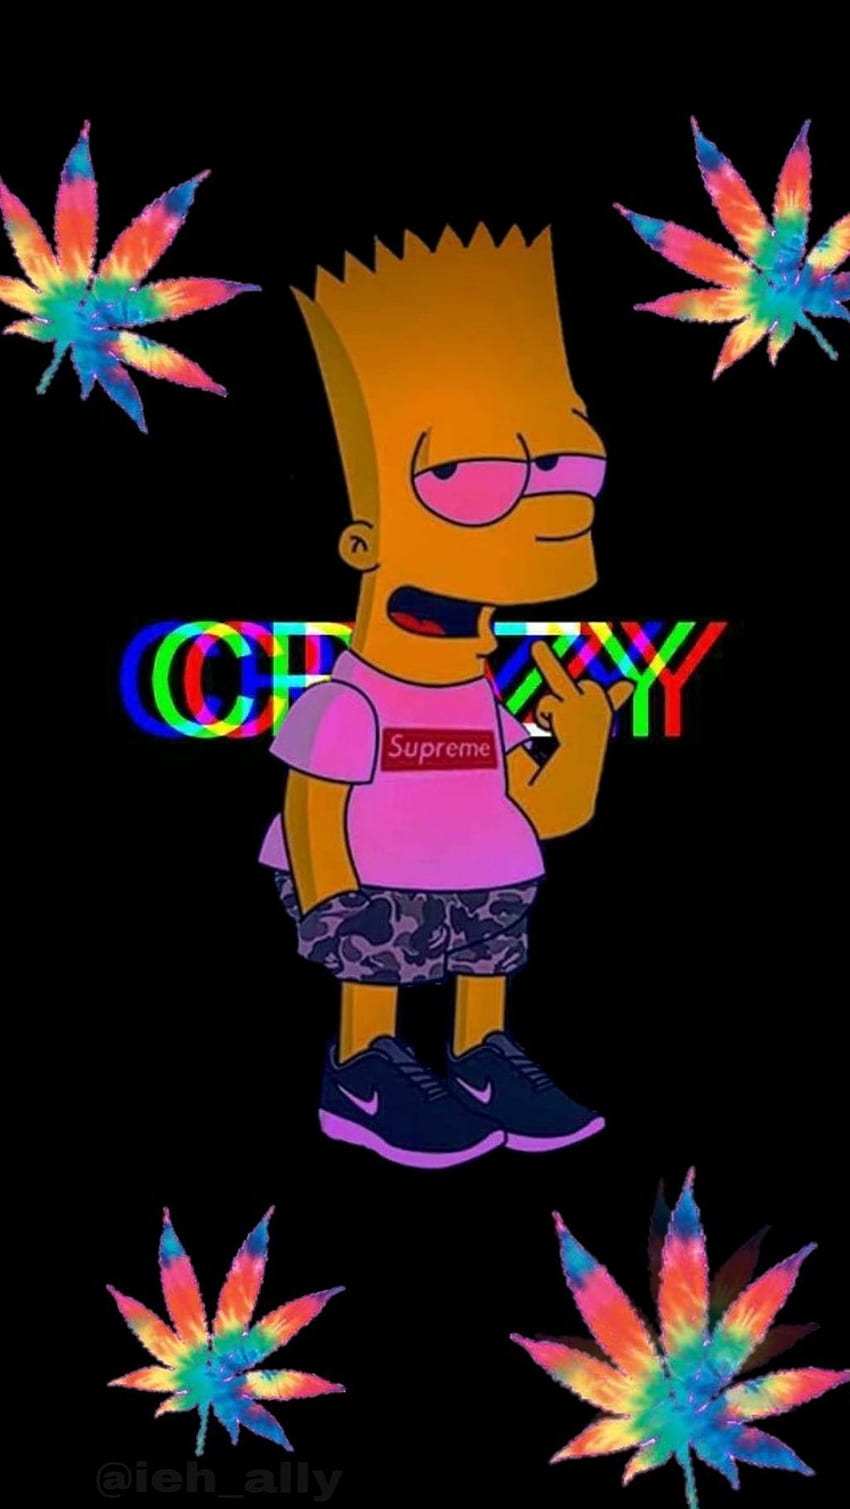 Bart Simpson Wallpaper Discover more Android Background Cartoon gangsta  swag wallpapers httpswwwenjpgcombartsimpson  Bart simpson The  simpsons Bart